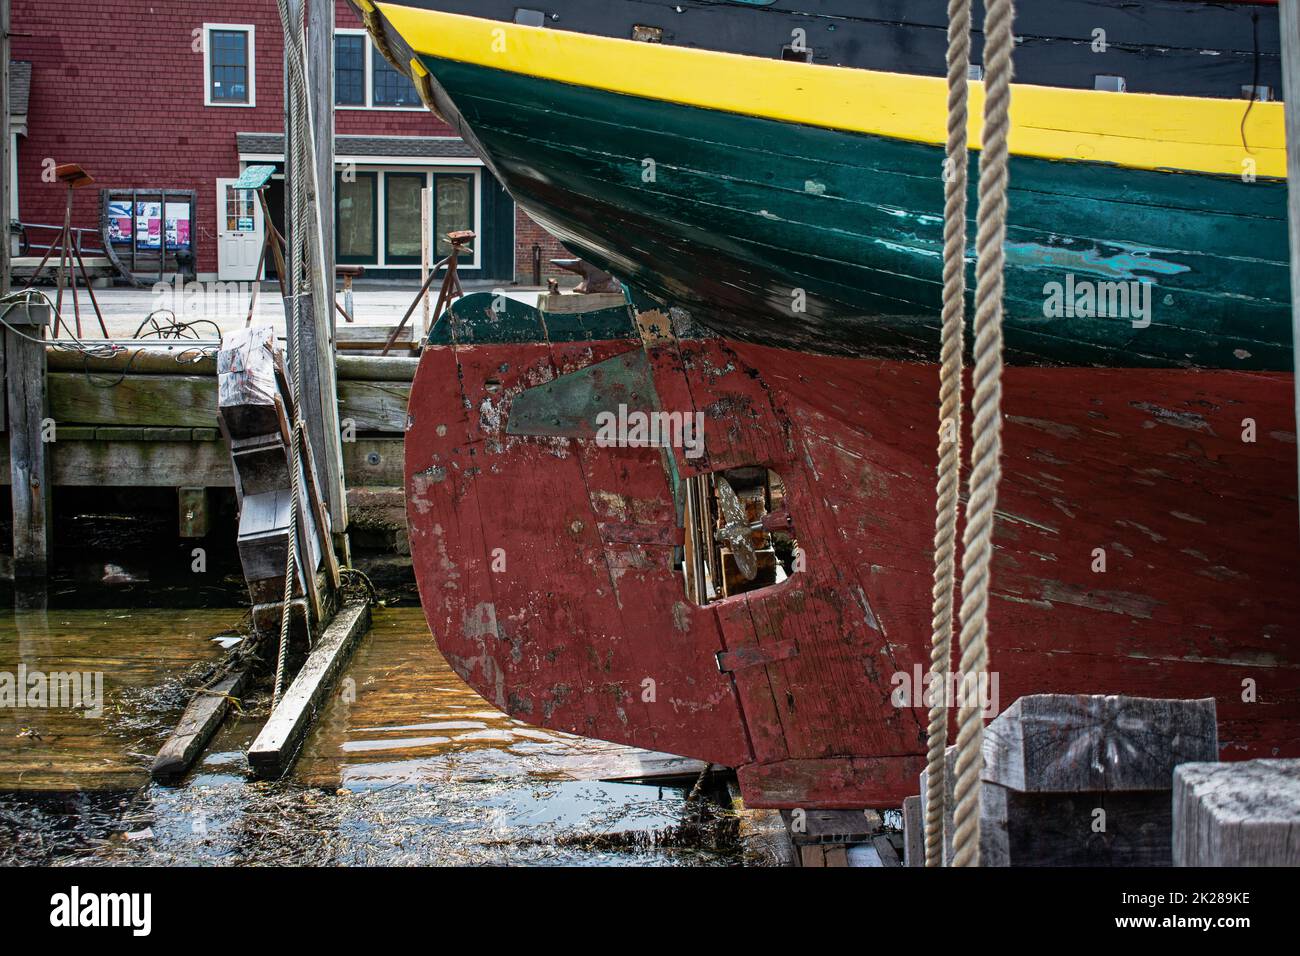 The Isabella a vintage wooden ship in drydock in Gloucester Harbor, Massachusetts. Stock Photo